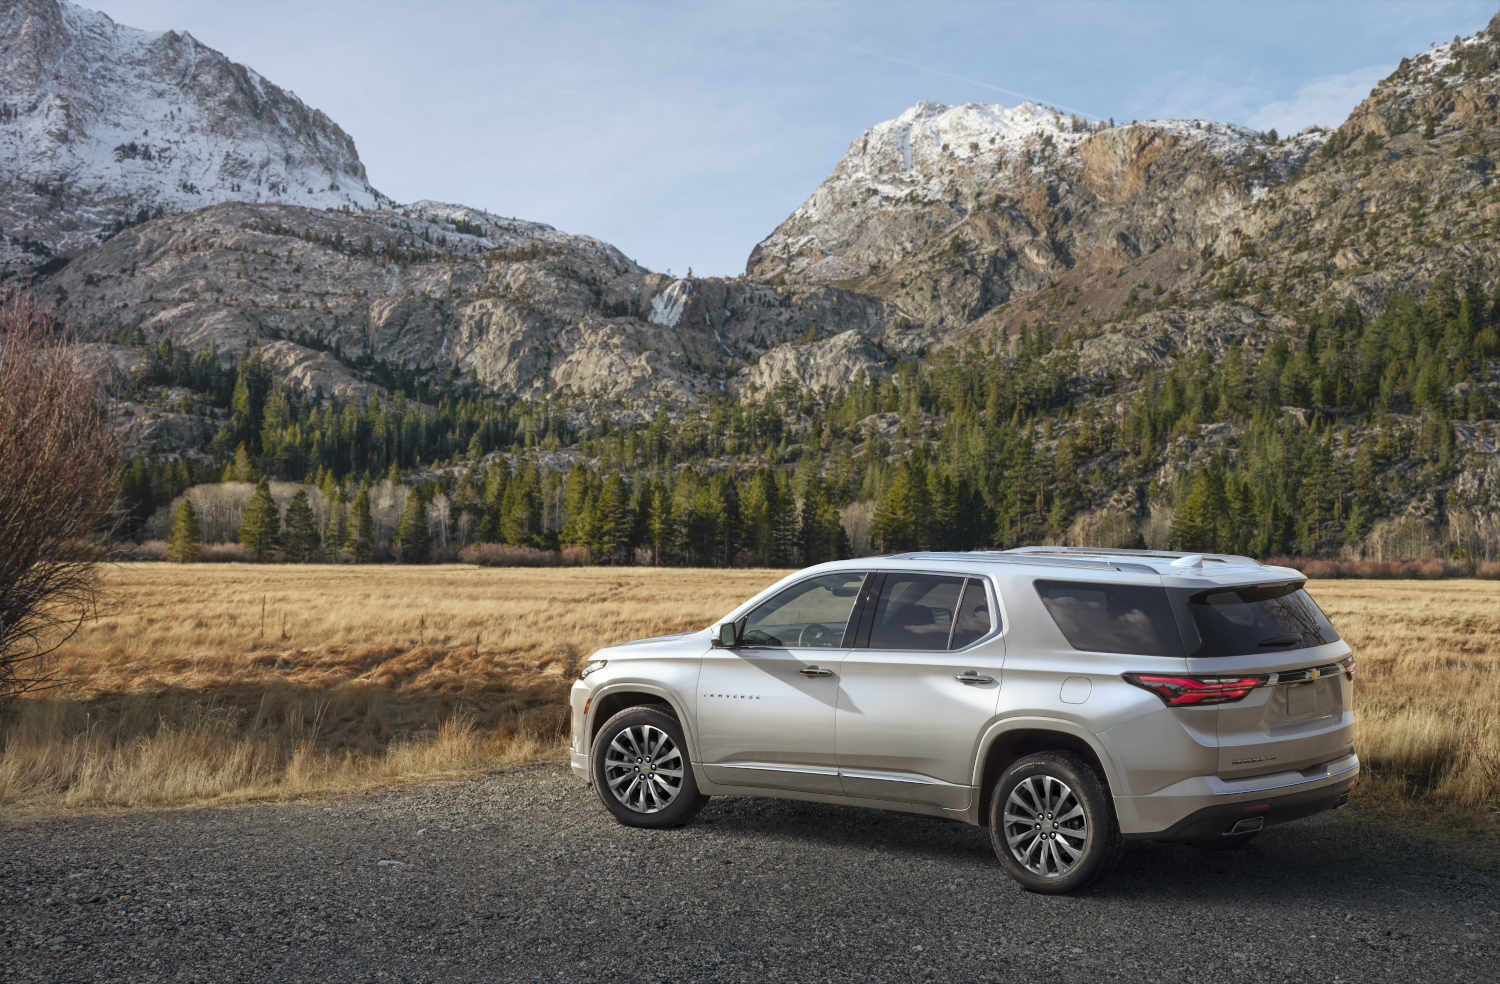 This Chevrolet Traverse falls behind other midsize SUVs